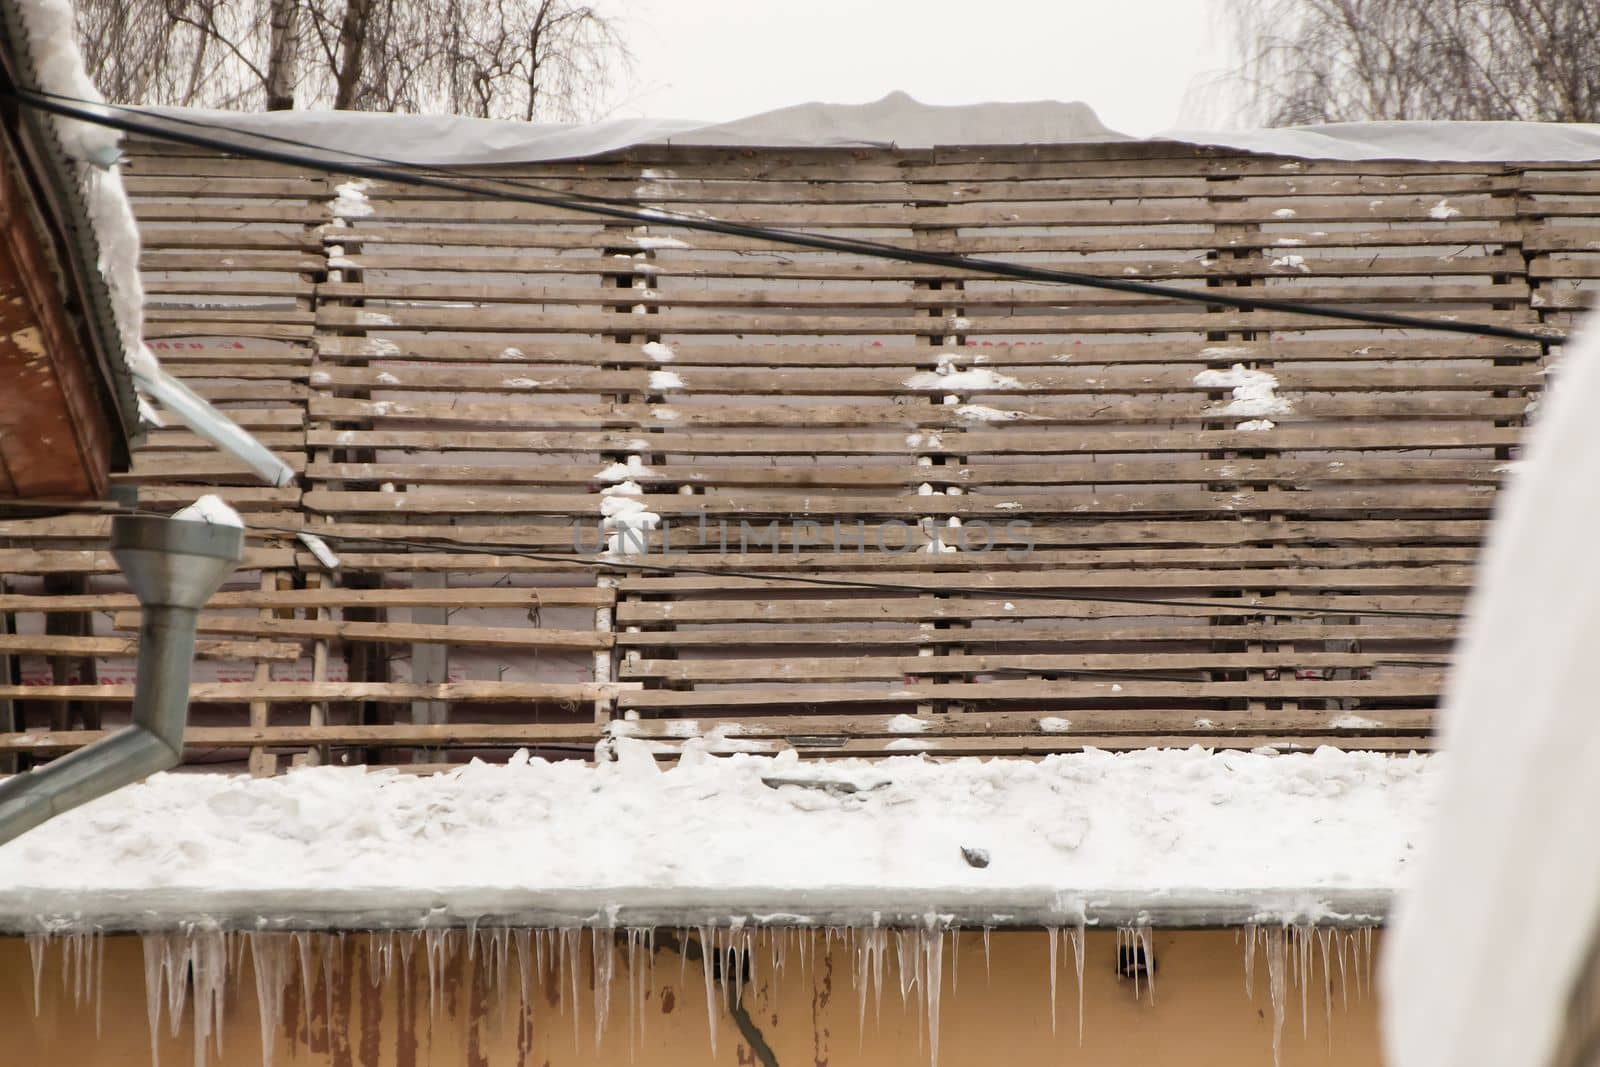 A dismantled roof with a wooden crate and hanging icicles on the edge. An old house against the backdrop of a gray sky. Large cascades of icicles hang in a row. Cloudy winter day, soft light.